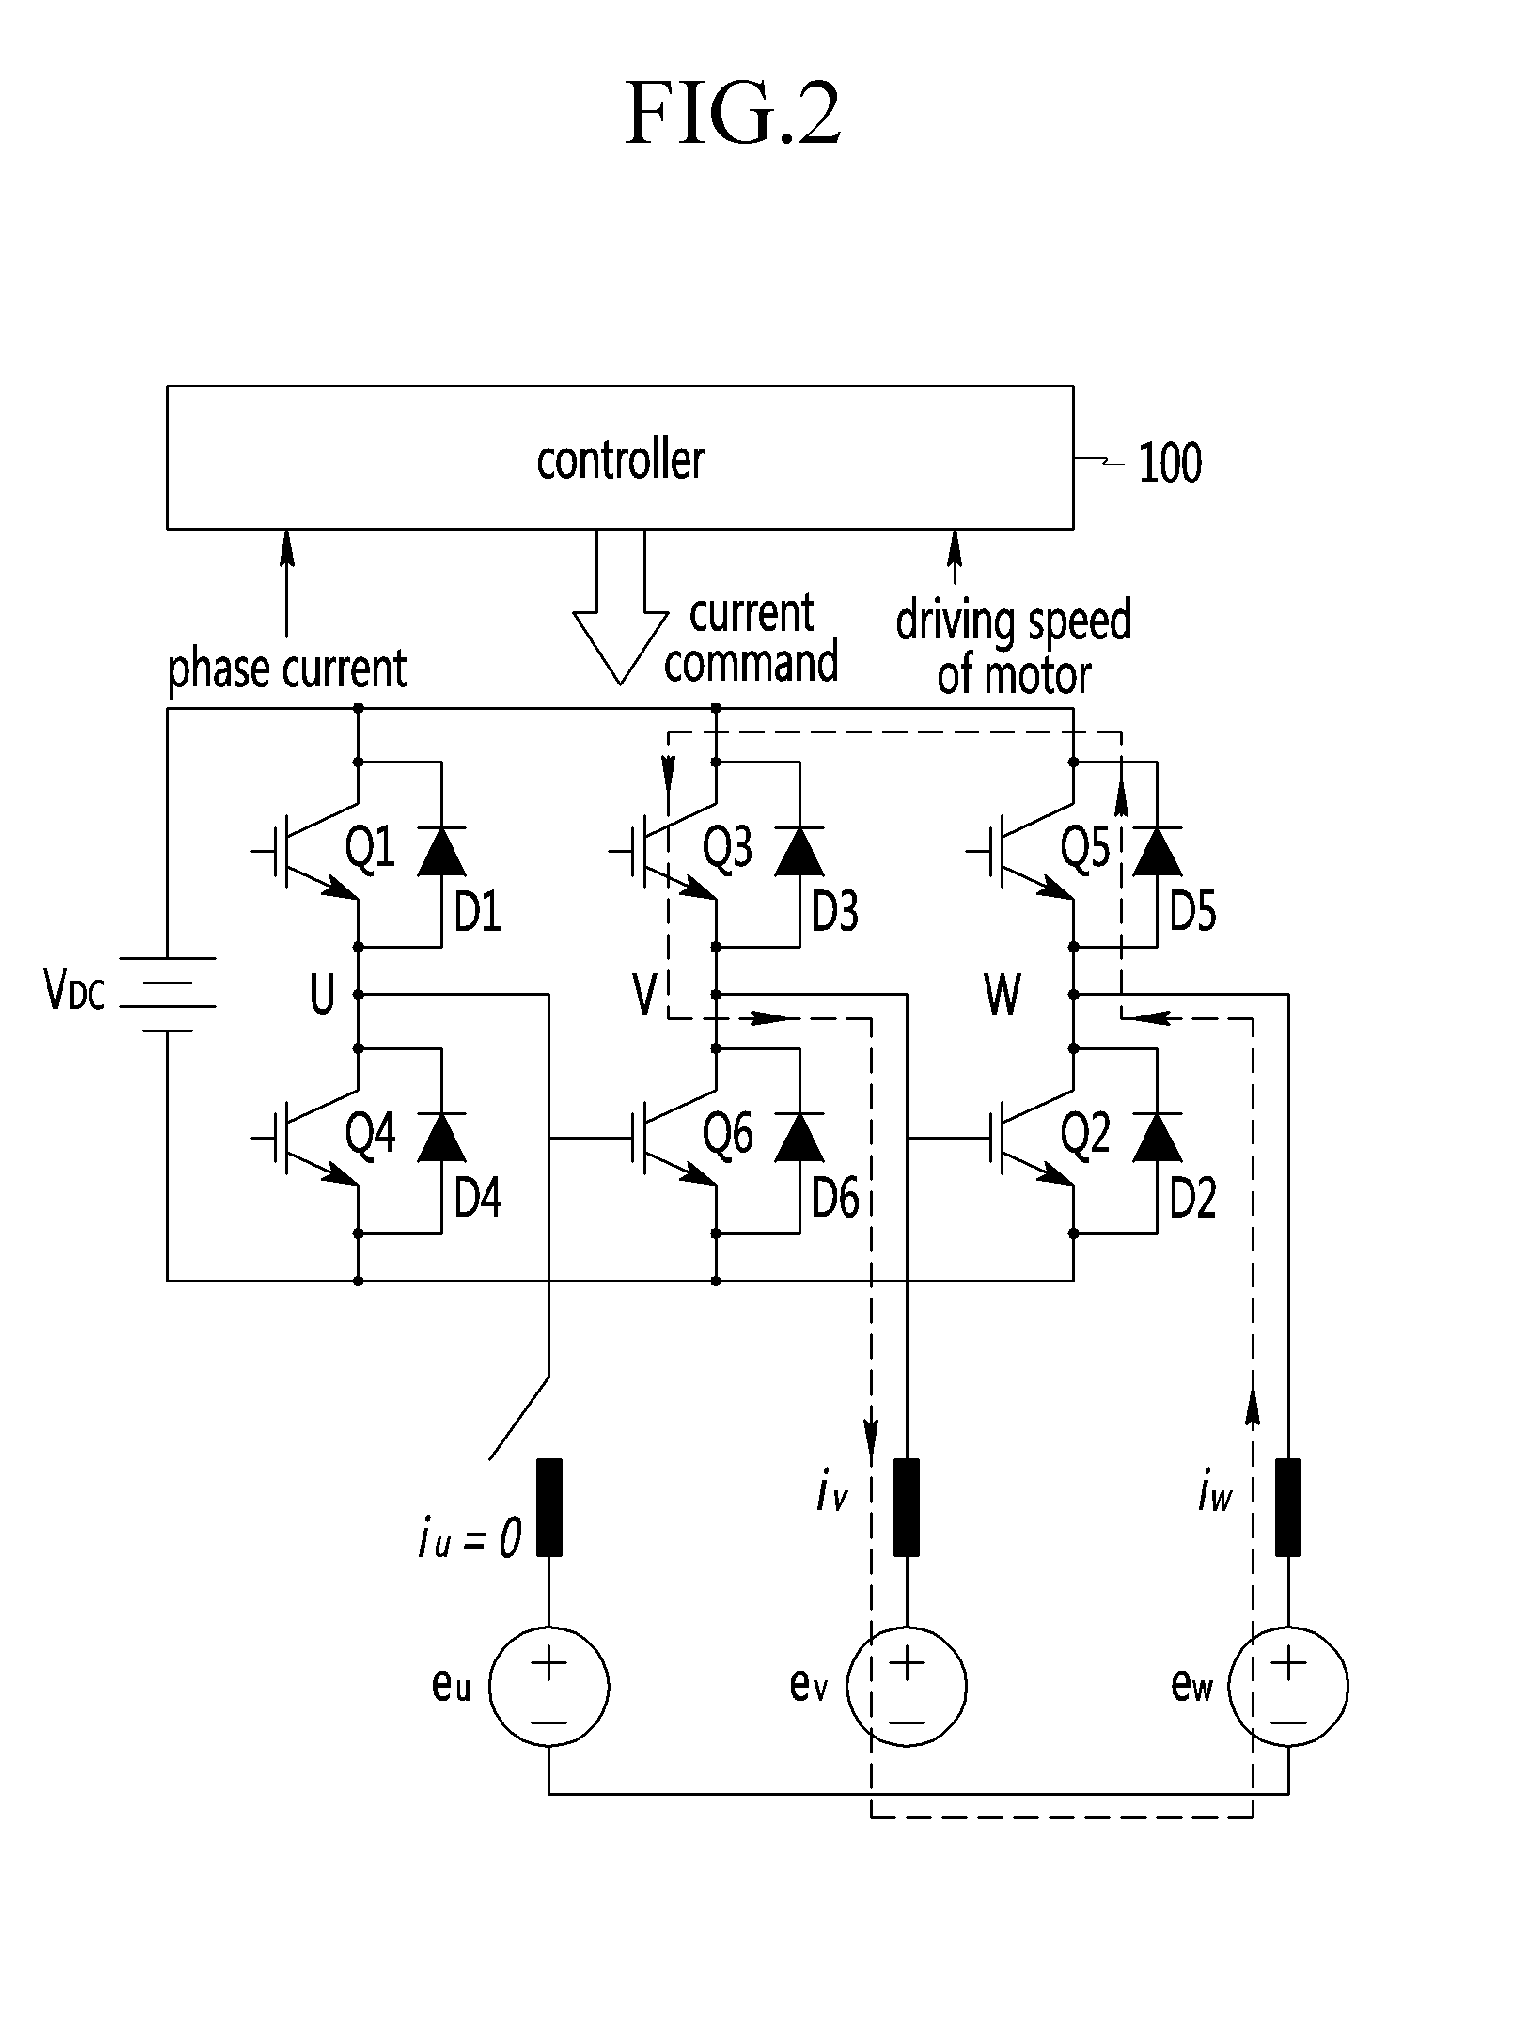 Power cable breaking detection method of motor